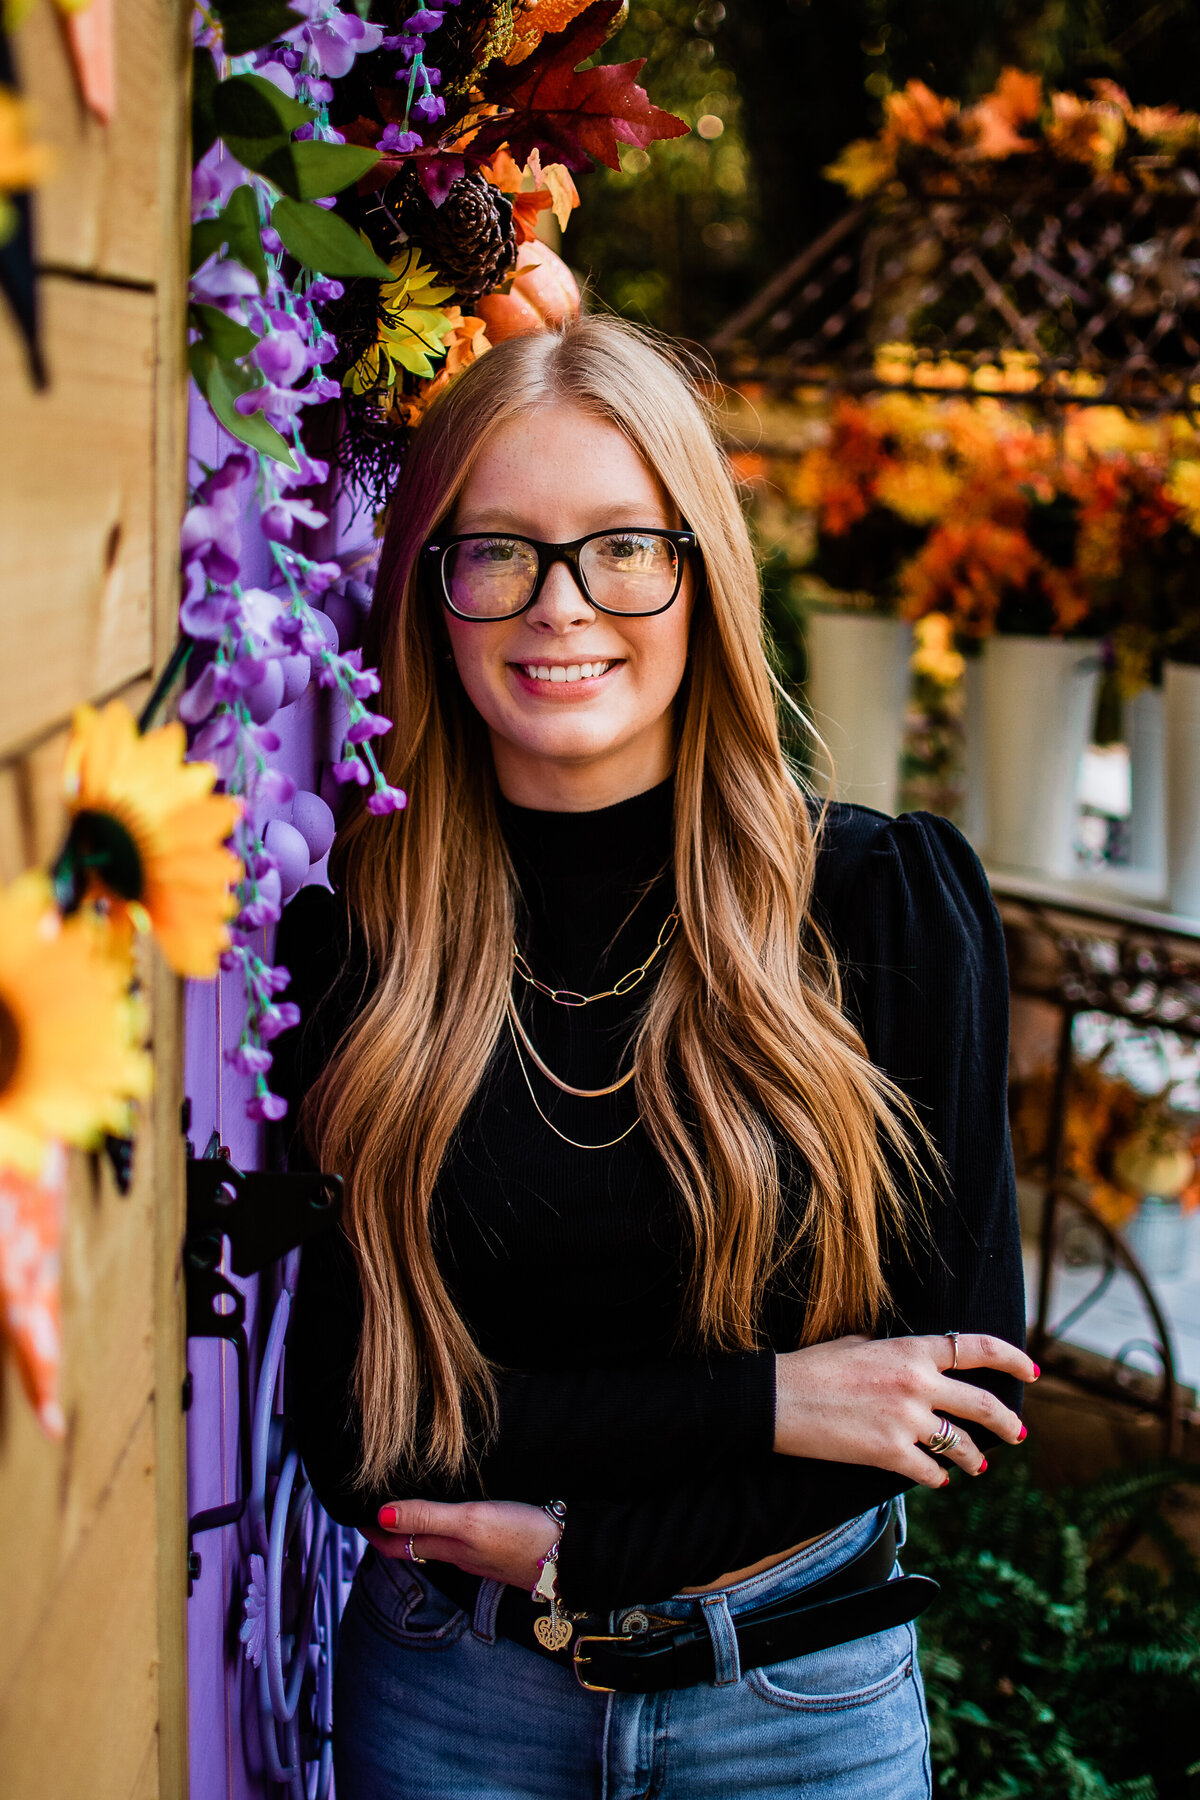 A senior wearing a black shirt and gold necklace leans against a door decorated with fall themed flowers.